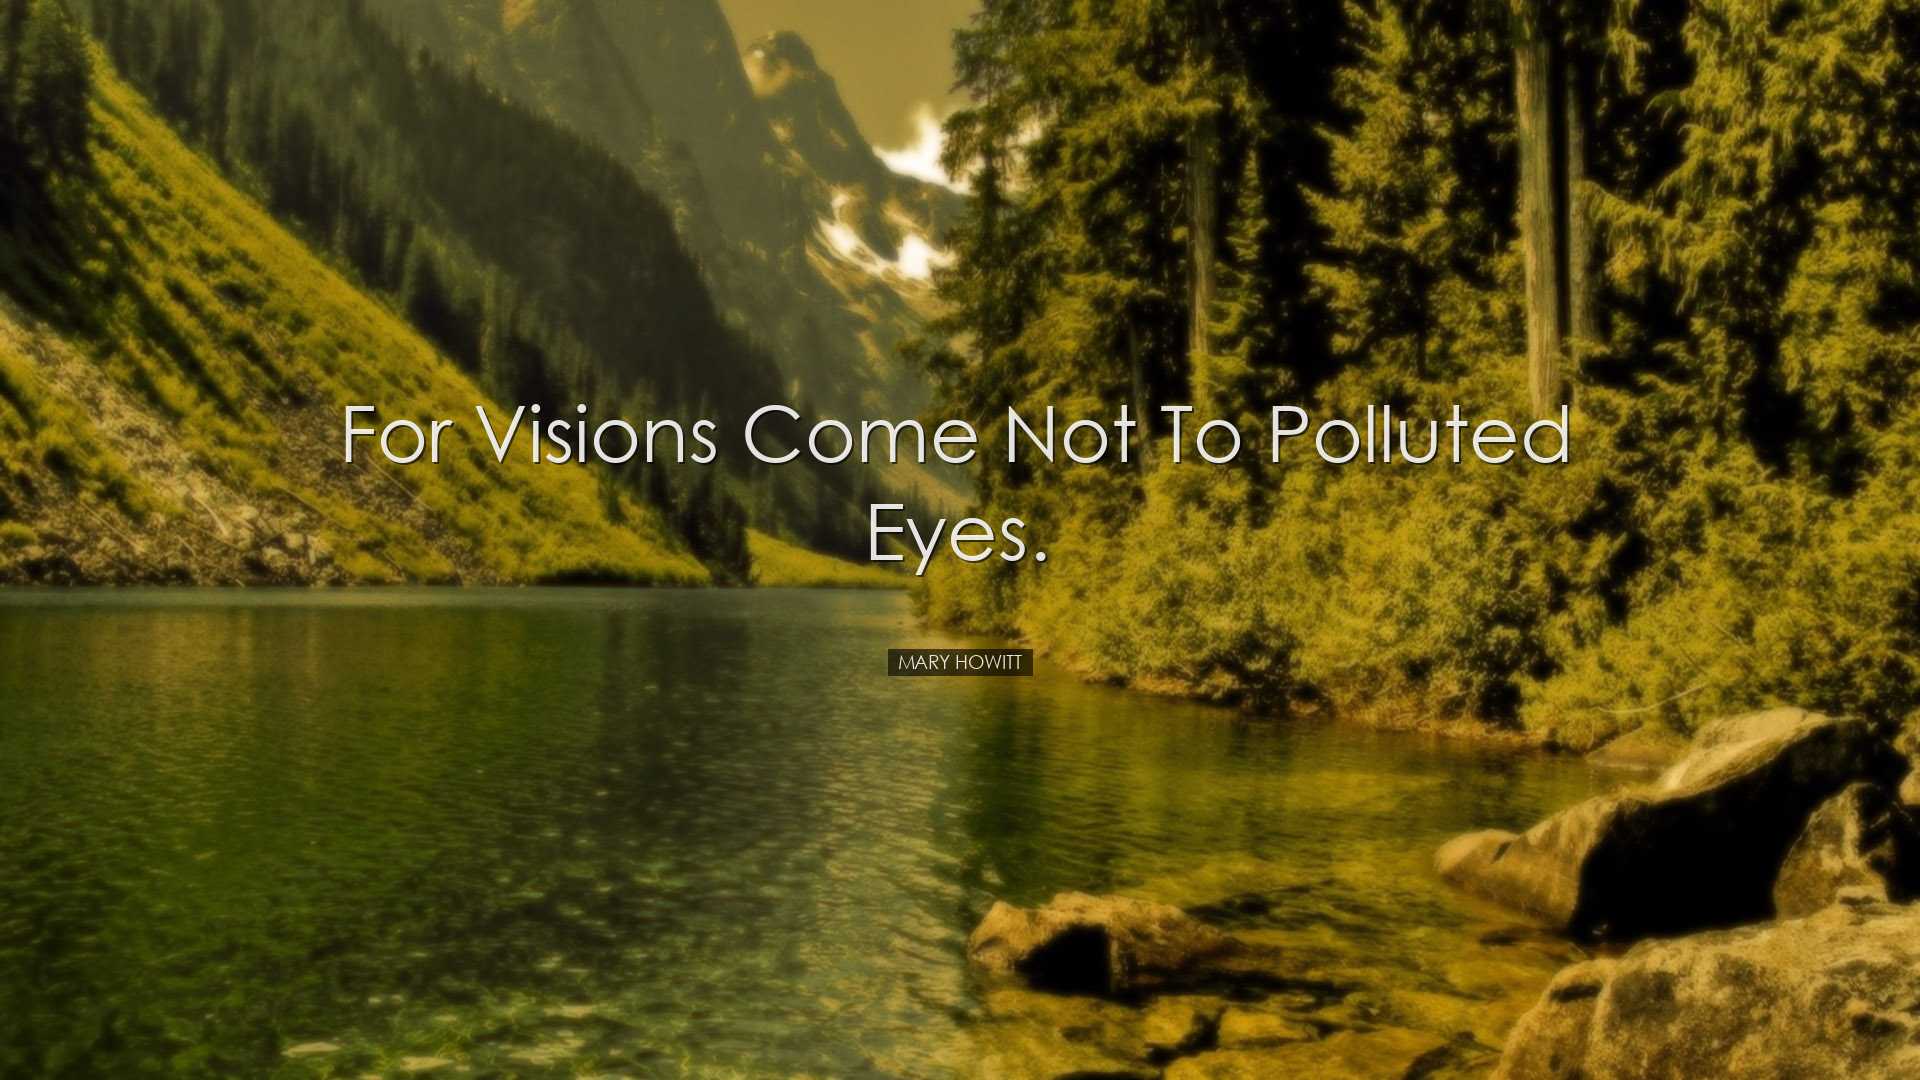 For visions come not to polluted eyes. - Mary Howitt